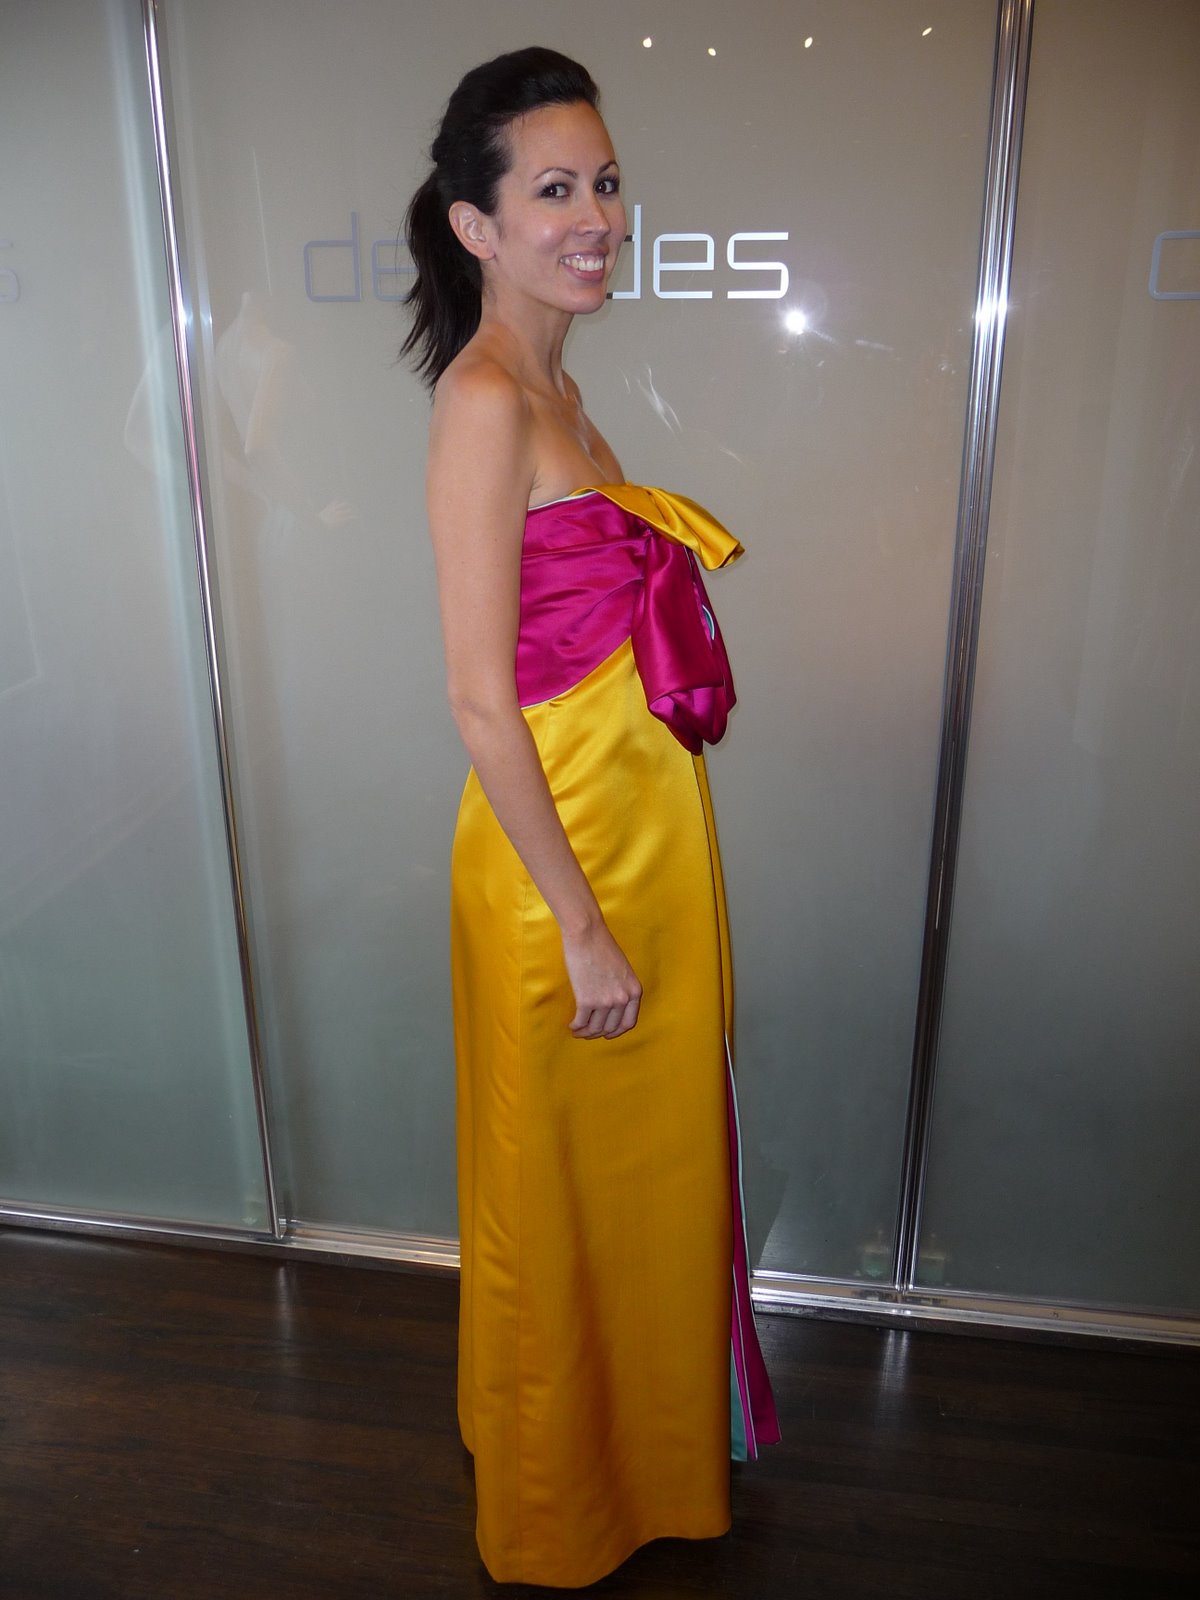 [BILL+BLASS+MARIGOLD+STRAPLESS+GOWN+WITH+HOT+PINK+AND+ICE+BOWNA+ND+CASCADE+C+80S.JPG+(2).JPG]